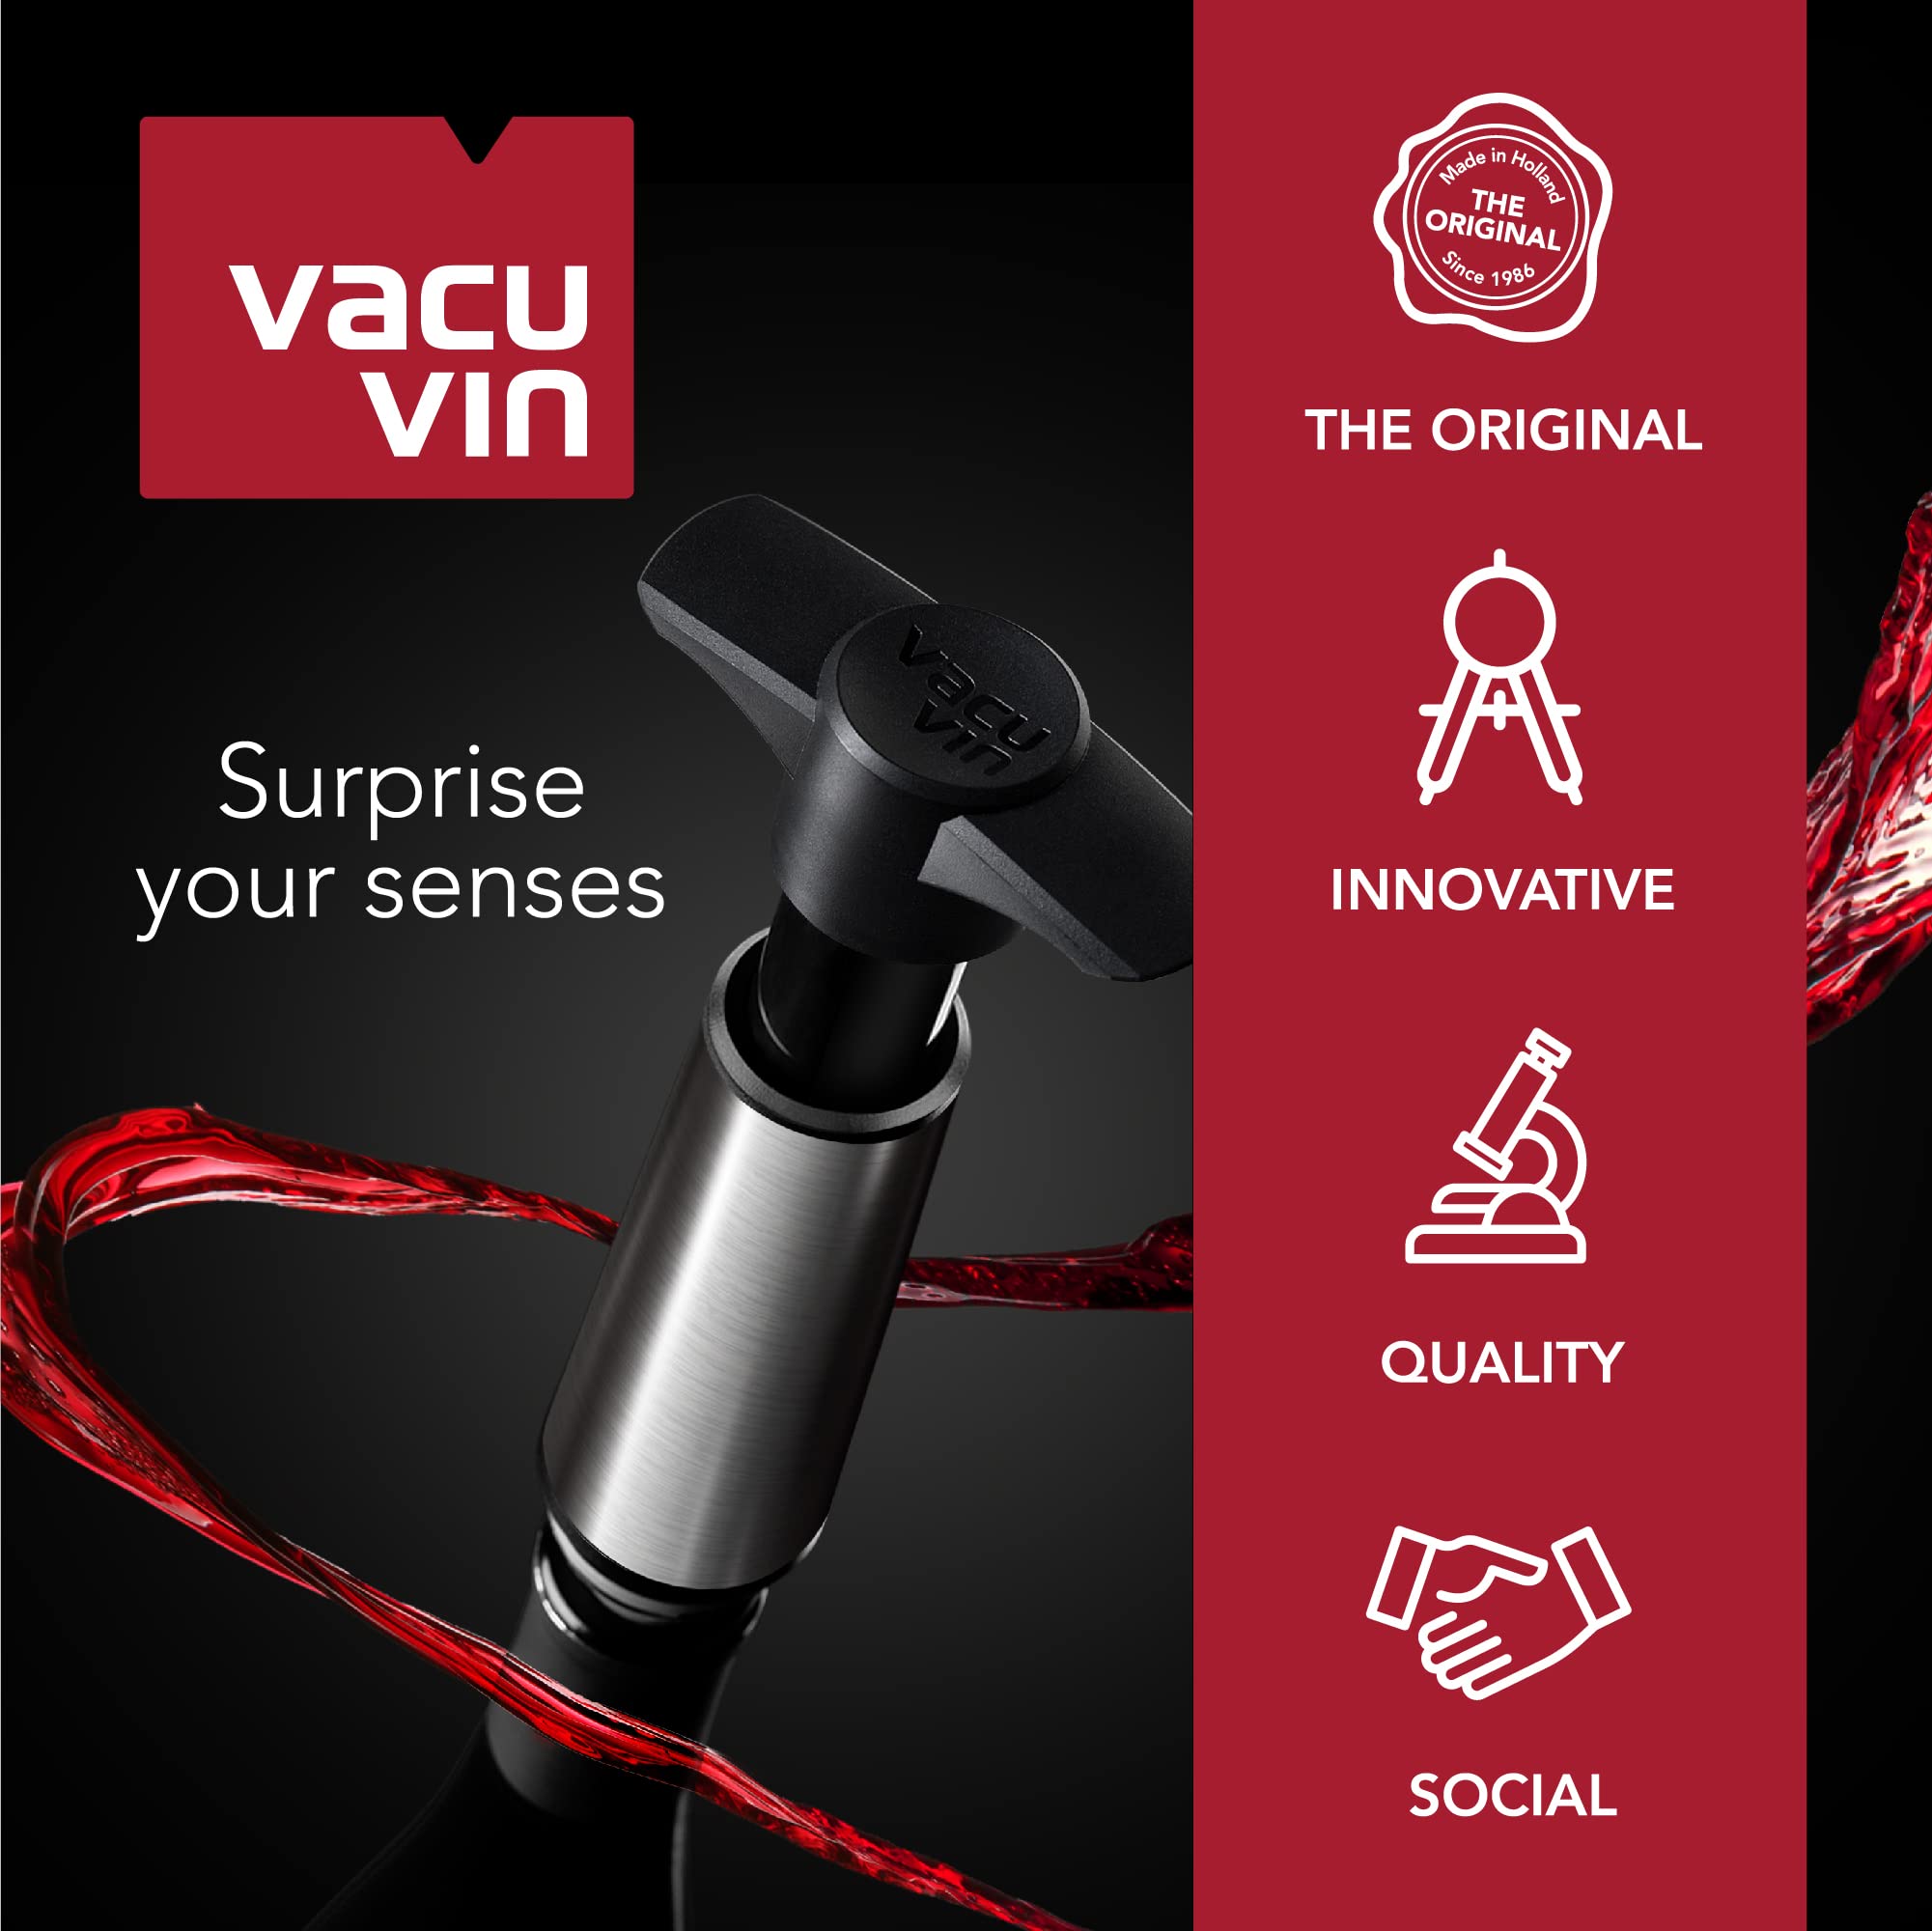 Vacu Vin Wine Saver Vacuum Stoppers - Set of 8 - Gray - for Wine Bottles - Keep Wine Fresh for Up to a Week with Airtight Seal - Compatible with Vacu Vin Wine Saver Pump